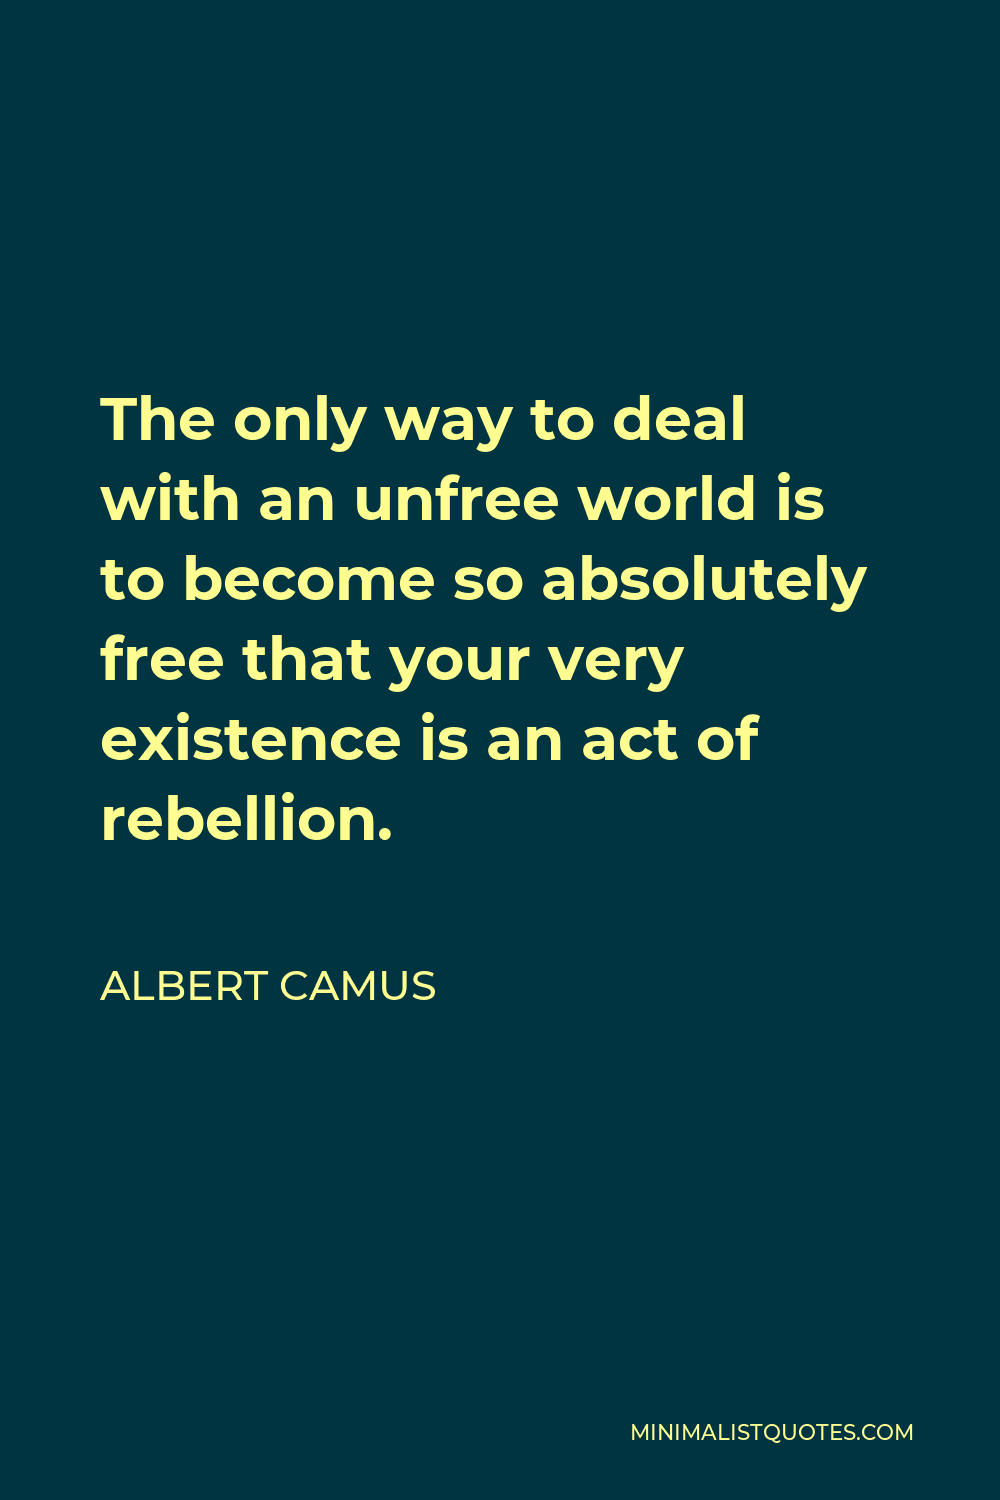 Albert Camus Quote - The only way to deal with an unfree world is to become so absolutely free that your very existence is an act of rebellion.